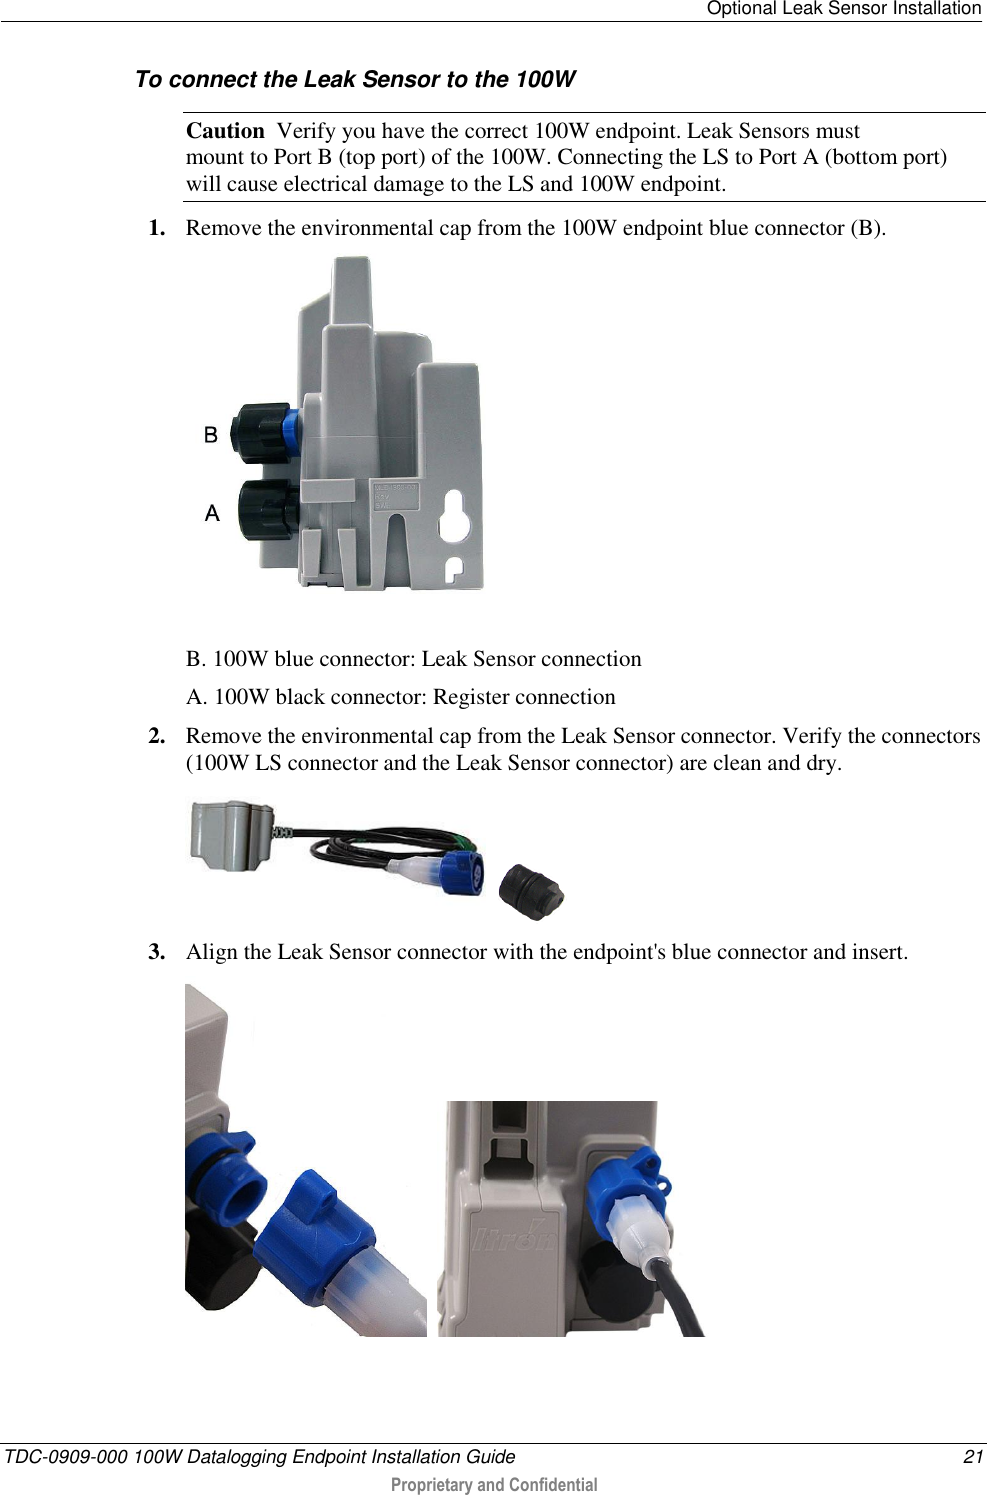   Optional Leak Sensor Installation  TDC-0909-000 100W Datalogging Endpoint Installation Guide  21  Proprietary and Confidential  To connect the Leak Sensor to the 100W  Caution  Verify you have the correct 100W endpoint. Leak Sensors must  mount to Port B (top port) of the 100W. Connecting the LS to Port A (bottom port) will cause electrical damage to the LS and 100W endpoint. 1. Remove the environmental cap from the 100W endpoint blue connector (B).   B. 100W blue connector: Leak Sensor connection A. 100W black connector: Register connection 2. Remove the environmental cap from the Leak Sensor connector. Verify the connectors (100W LS connector and the Leak Sensor connector) are clean and dry.     3. Align the Leak Sensor connector with the endpoint&apos;s blue connector and insert.      